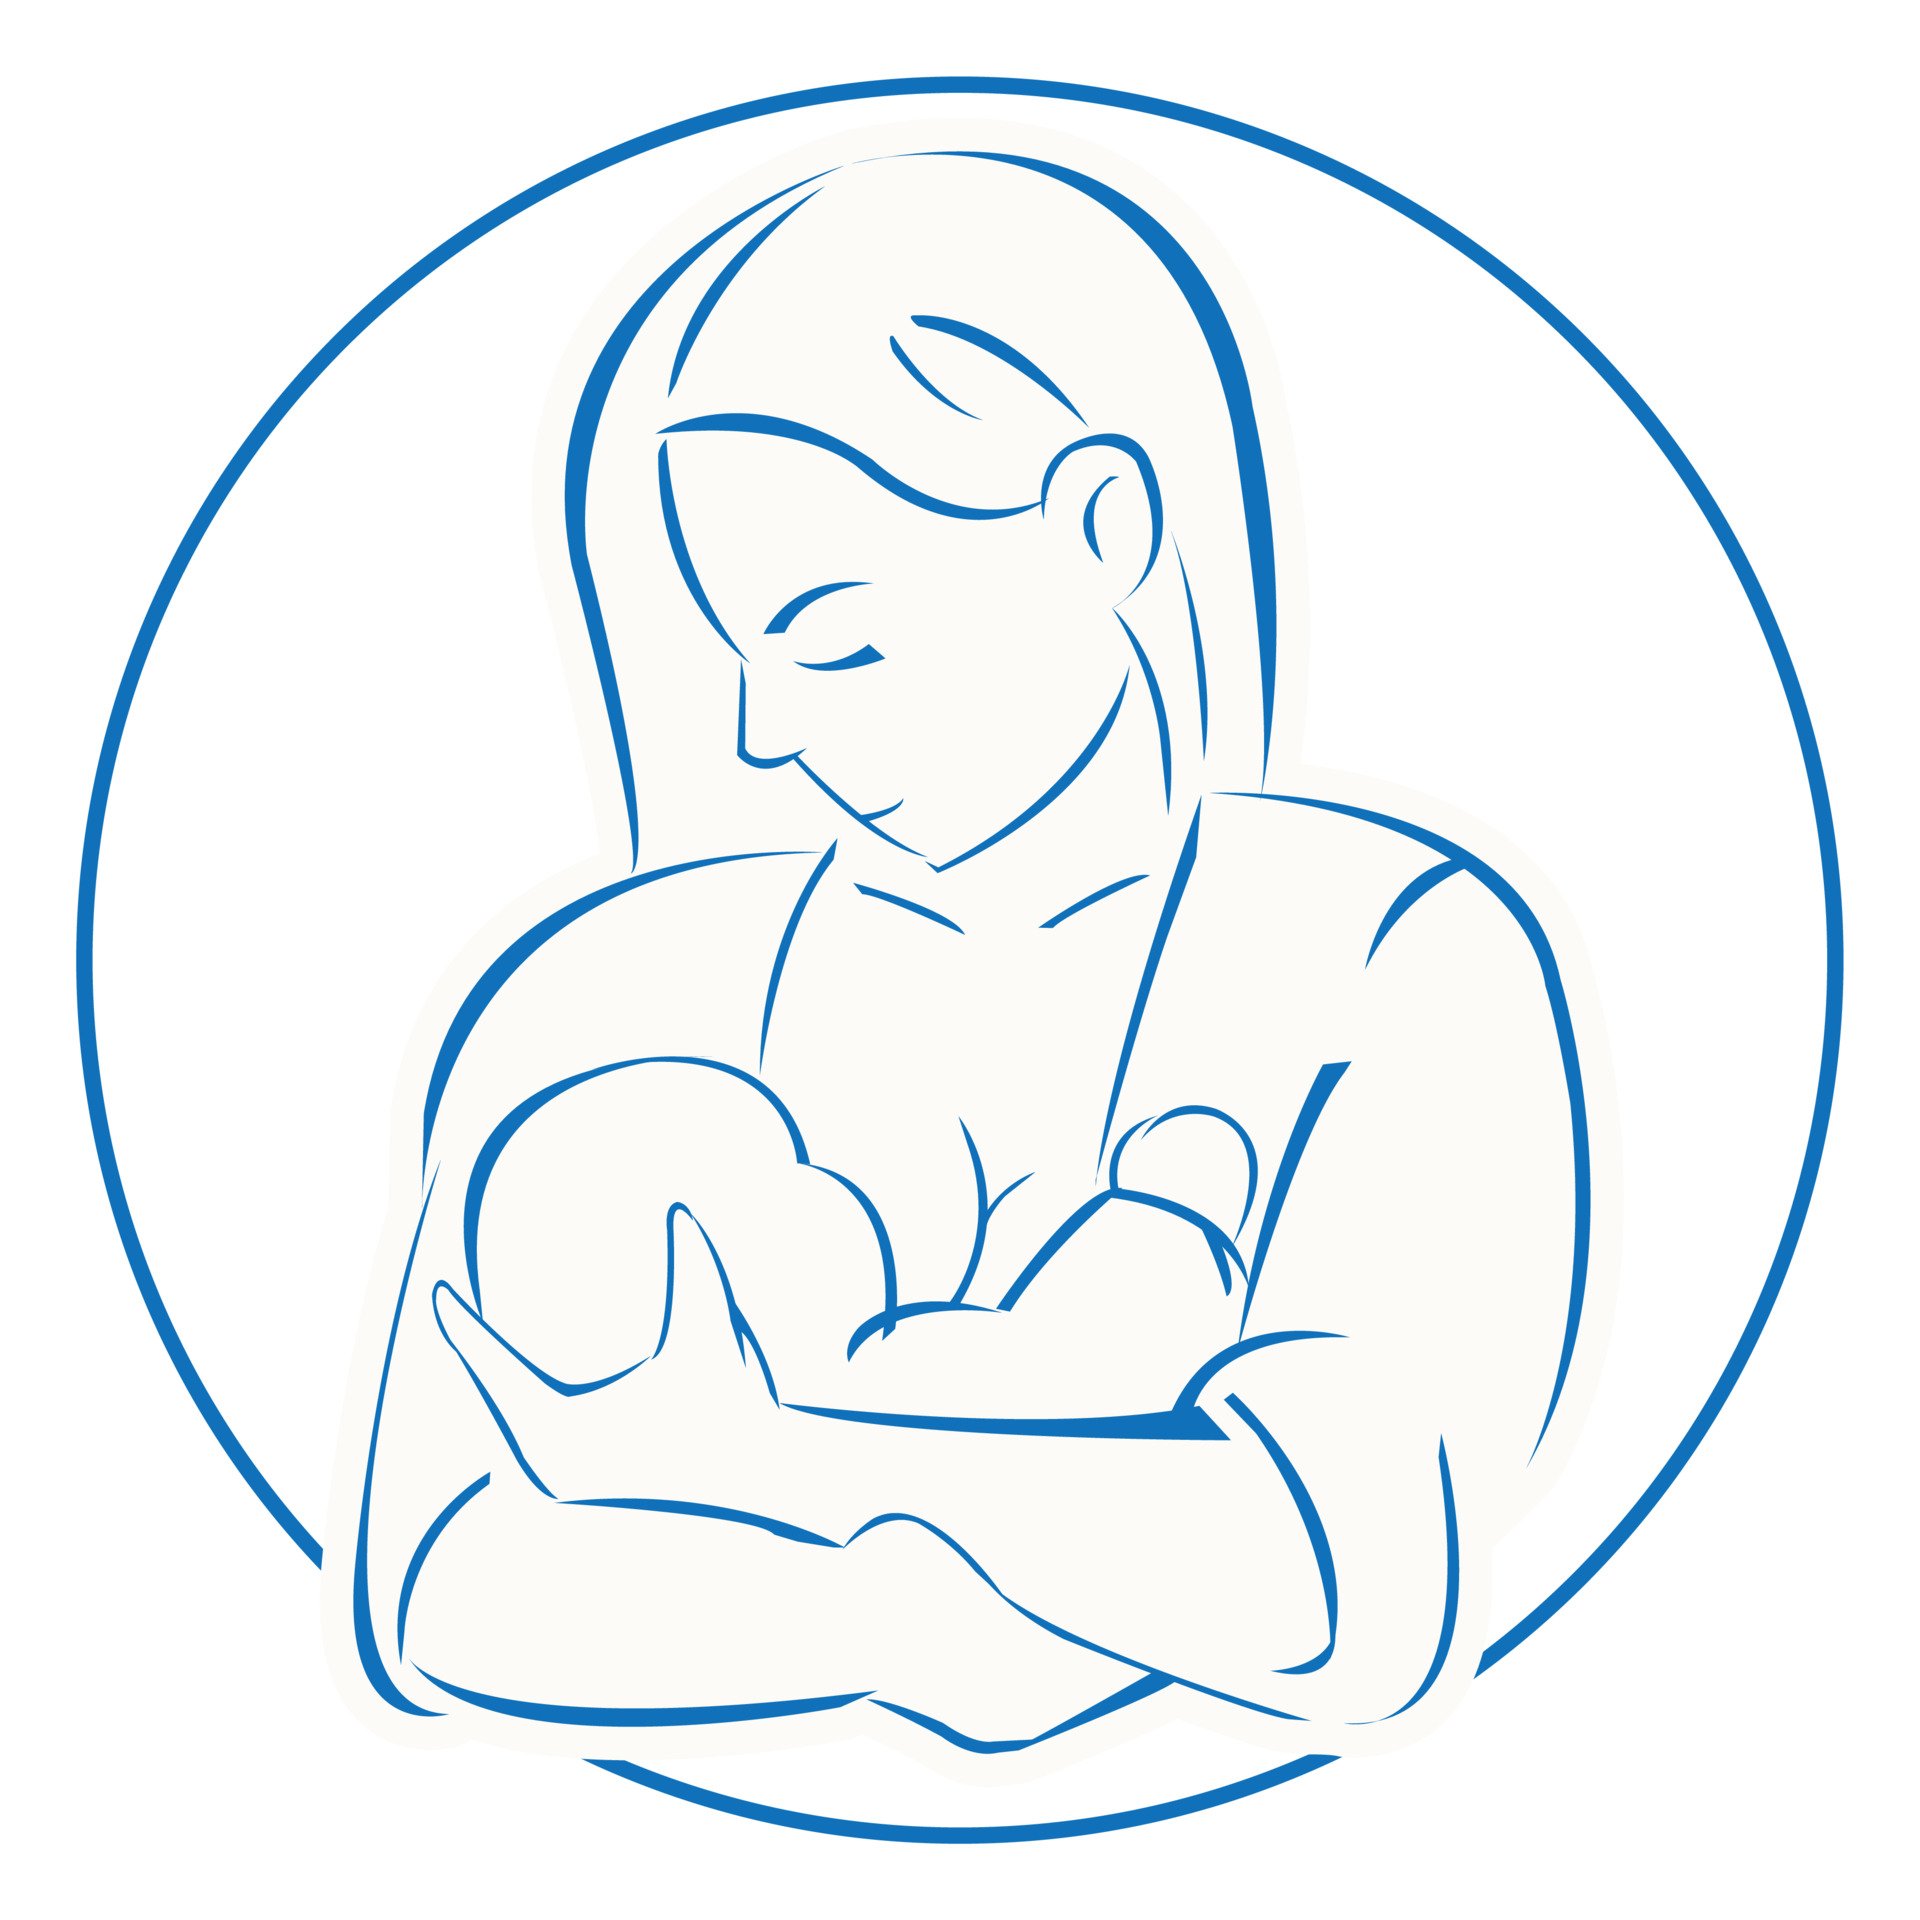 Breastfeeding mother during lactation